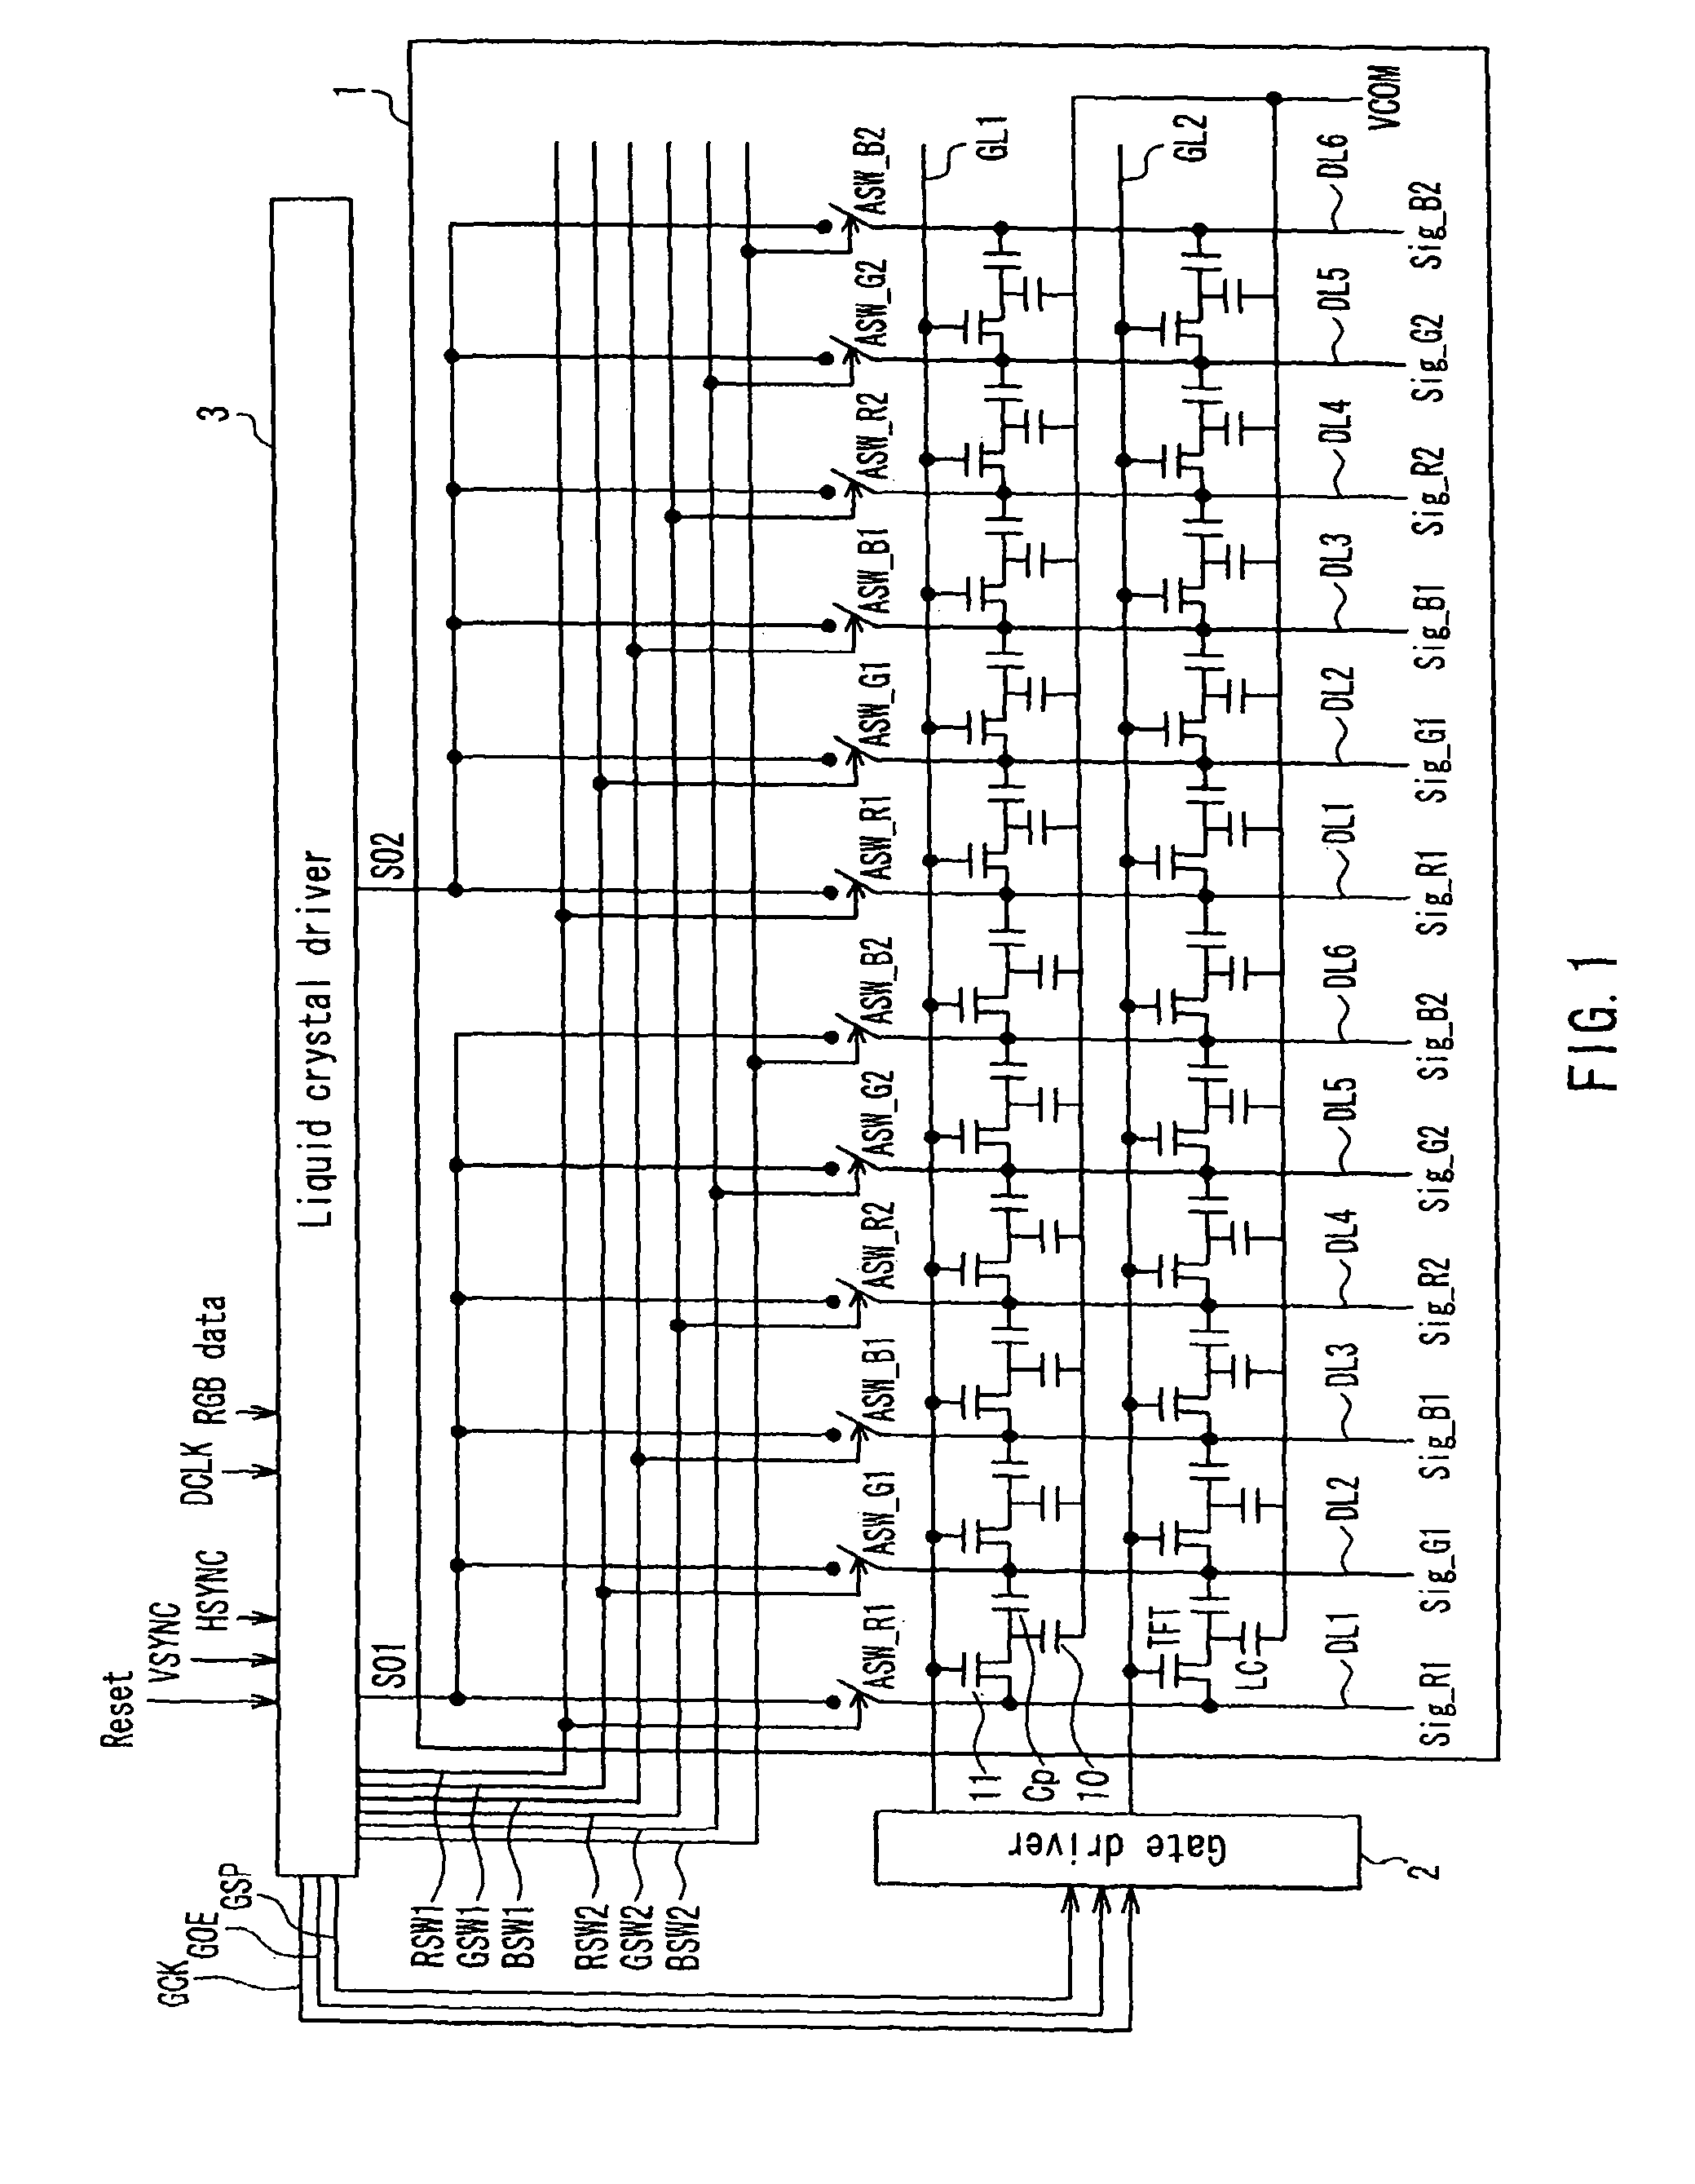 Active matrix type display device and drive control circuit used in the same